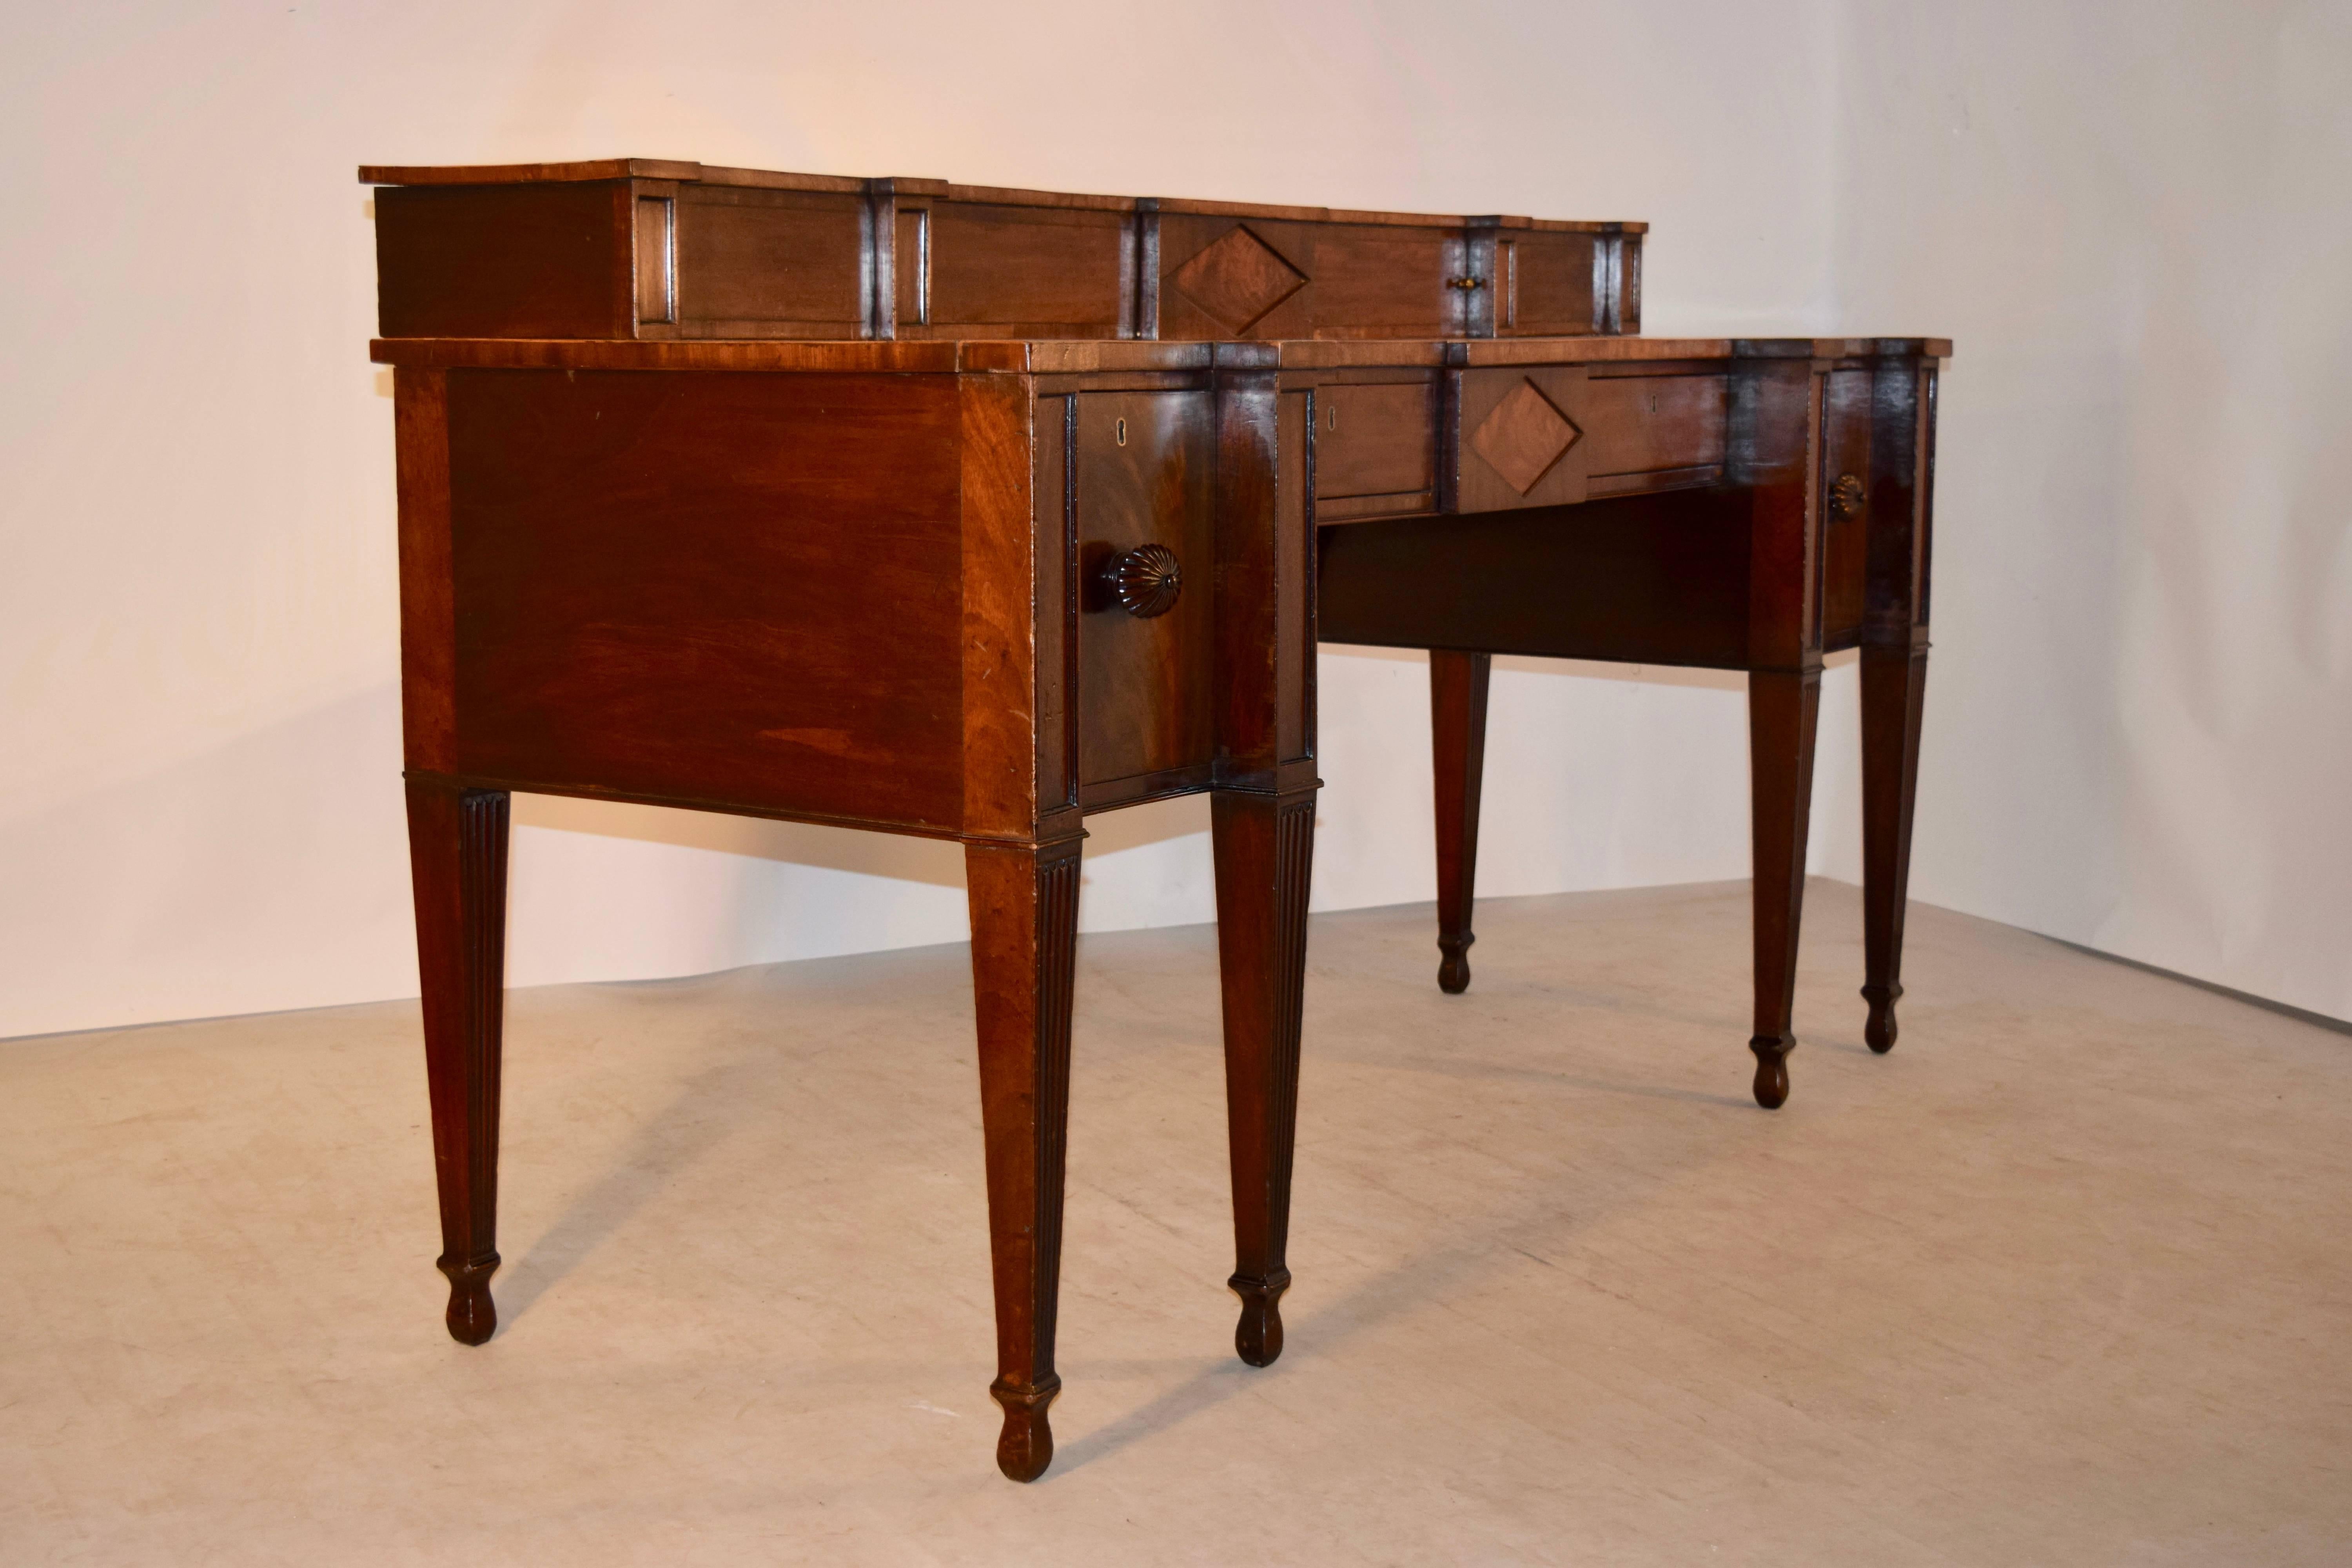 18th century Georgian mahogany sideboard with stepped back. There are two sliding doors on the upper part of the sideboard, following down to a wonderfully grained surface. There are two central drawers, flanked by two cellarette drawers, one of